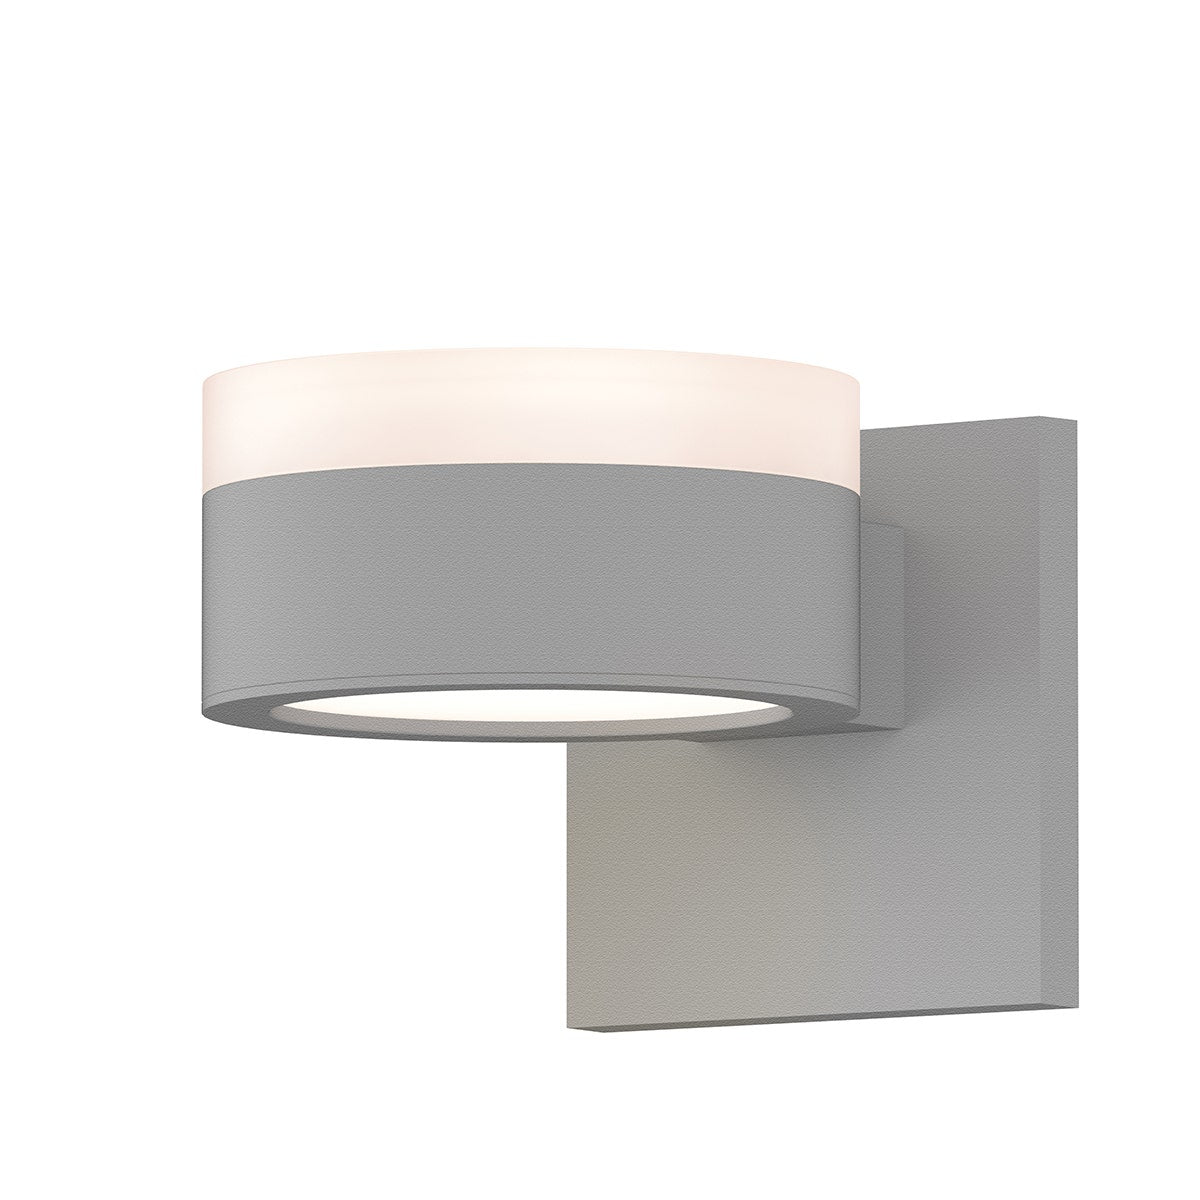 REALS Up/Down LED Sconce with Cylinder Top and Plate Bottom